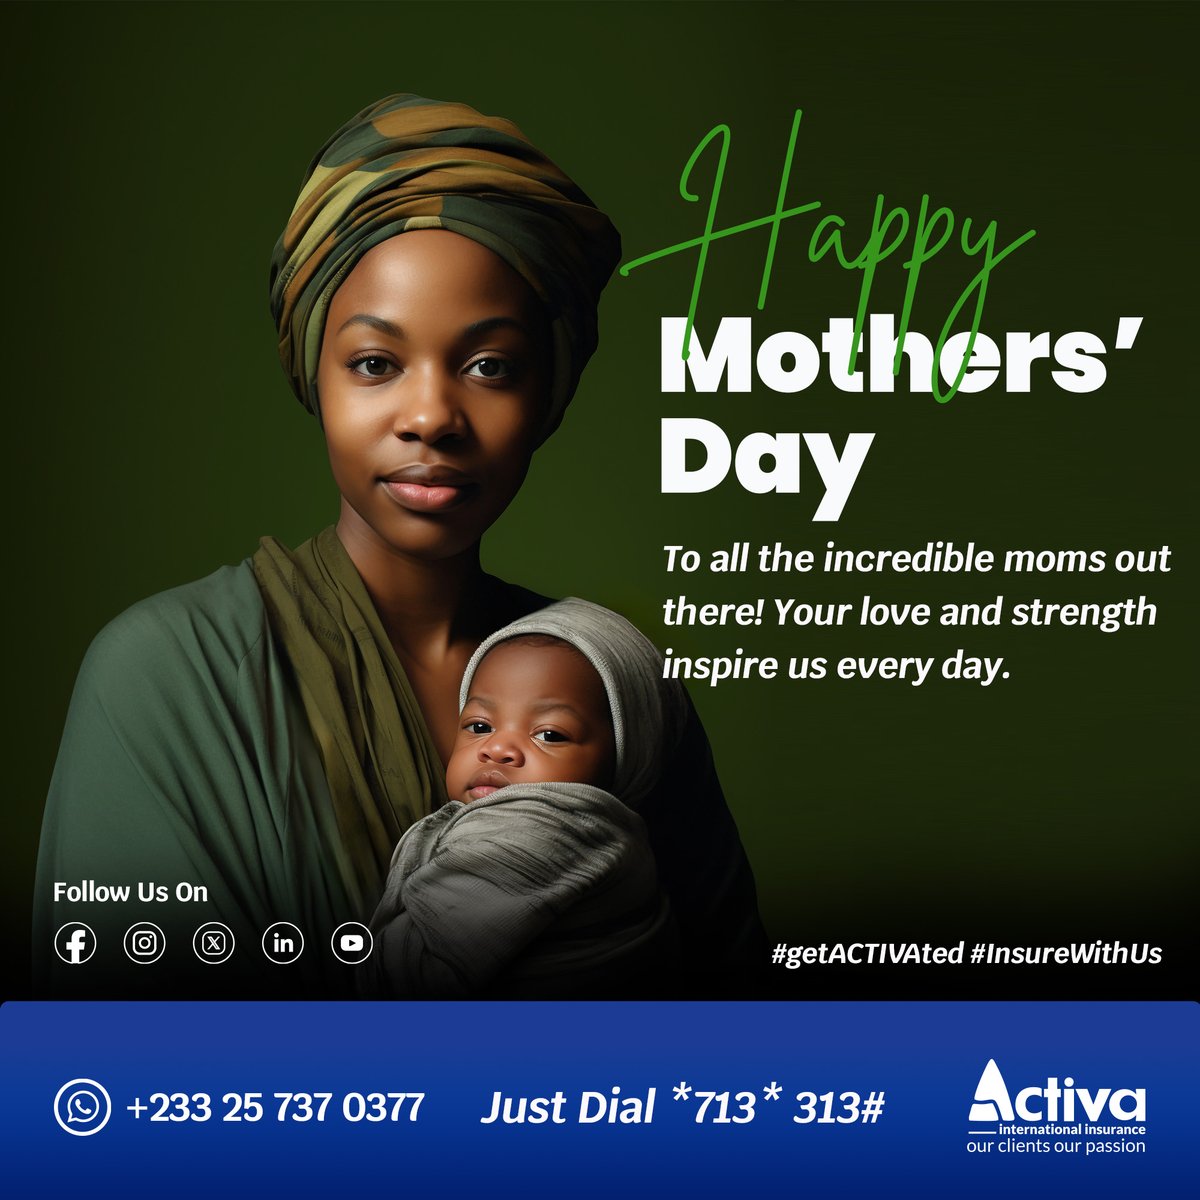 Happy Mother's Day to all the incredible moms. Wishing you a day filled with love, joy, and peace of mind. From Activa International Insurance, thank you for all that you do!
#MothersDay #ActivaInsurance #InsureWithUs #getACTIVAted #Insurance #ActivaGhana